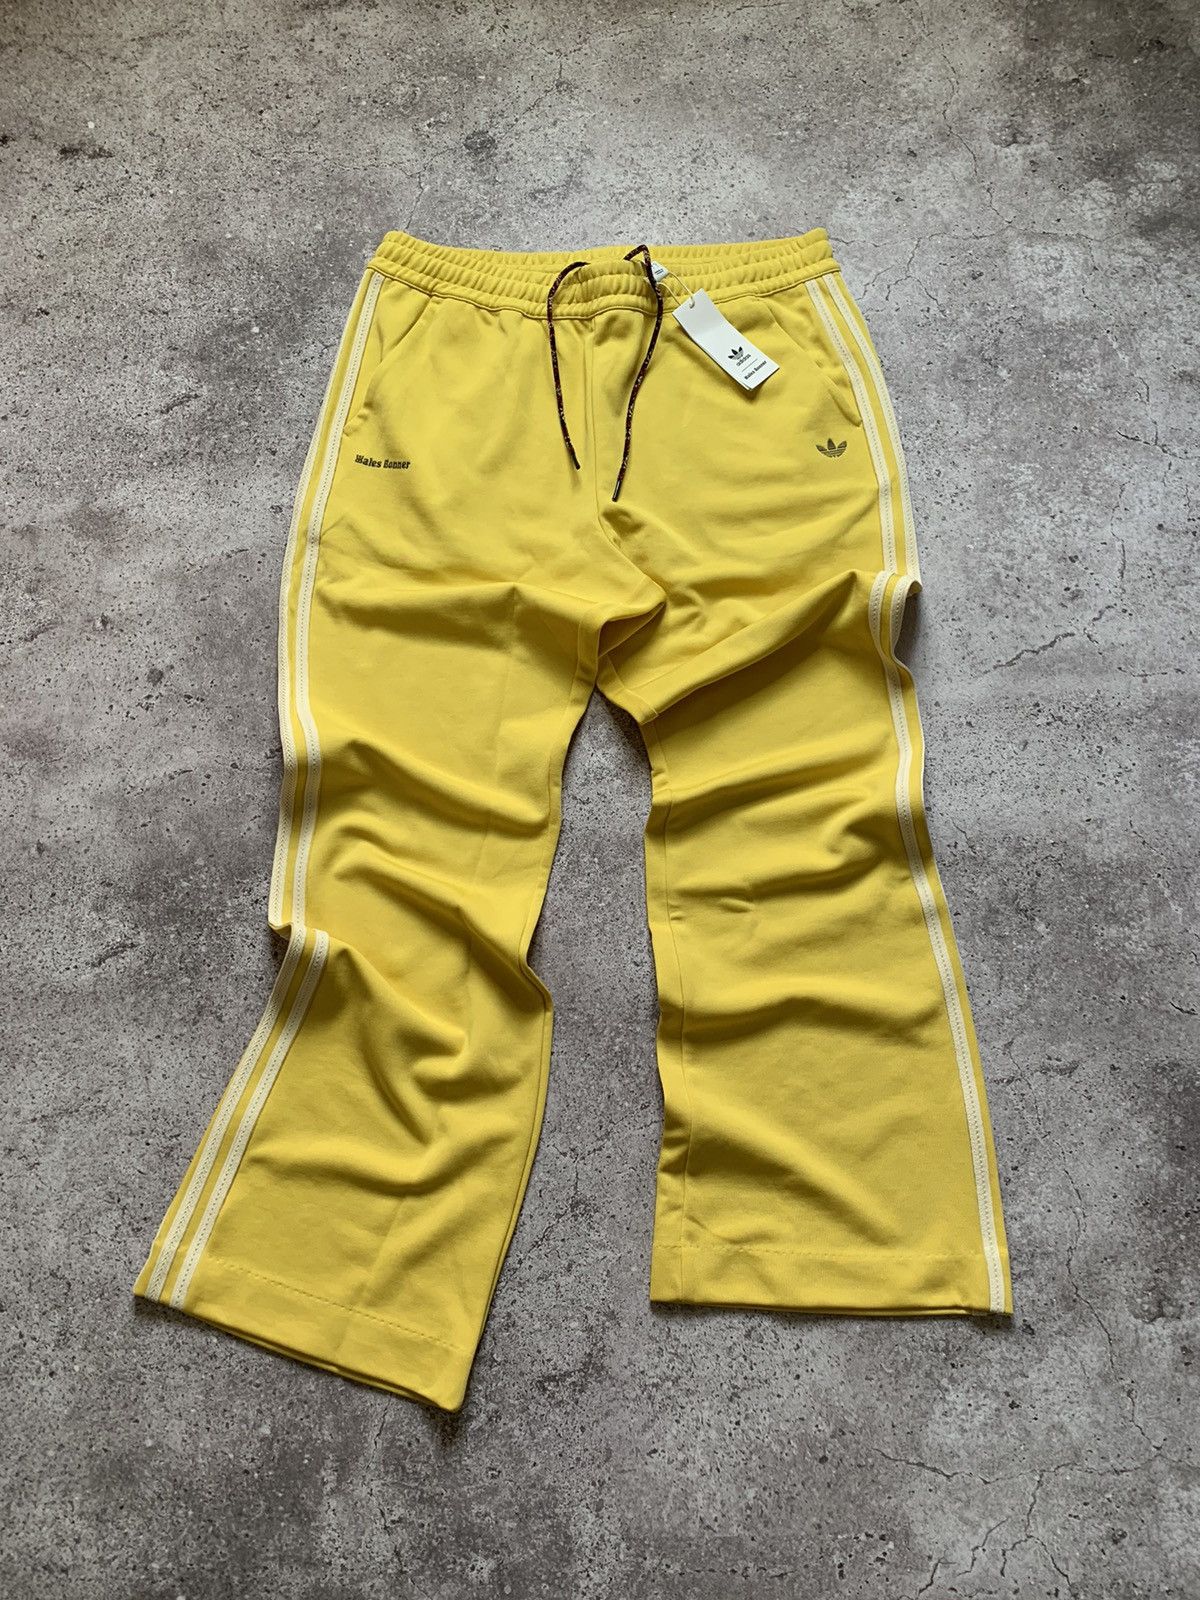 Pre-owned Adidas X Wales Bonner Adidas Track Pants Yellow